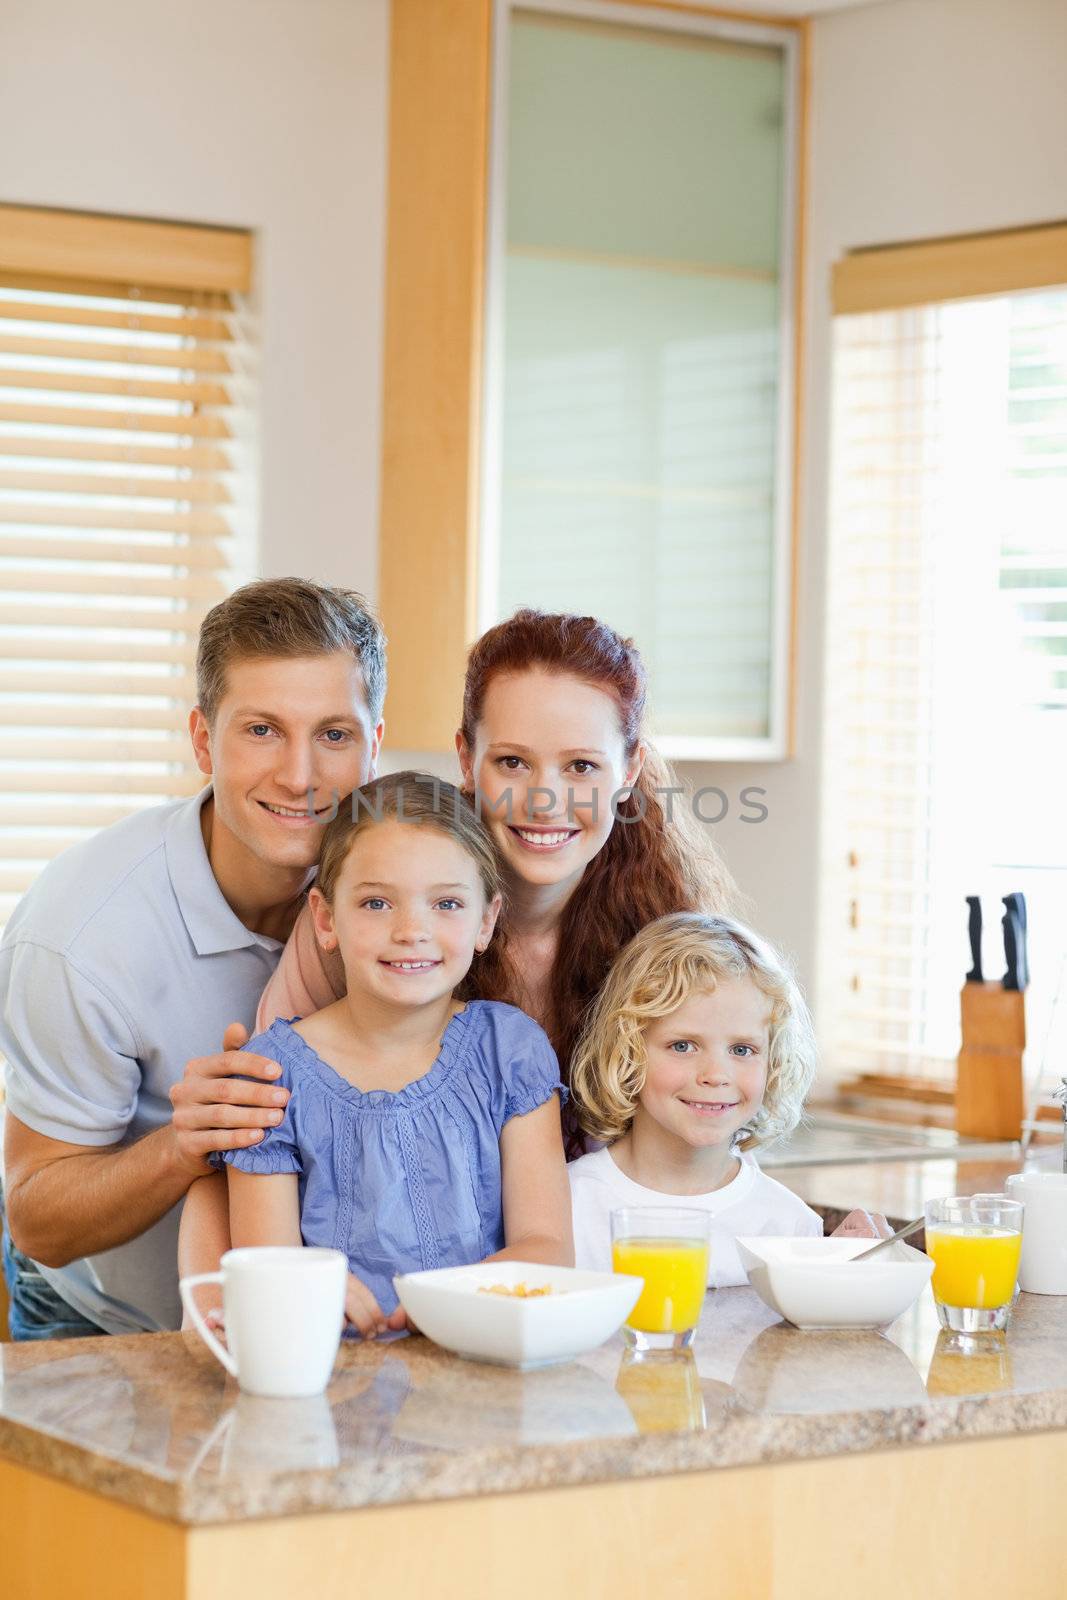 Family with their breakfast in the kitchen by Wavebreakmedia